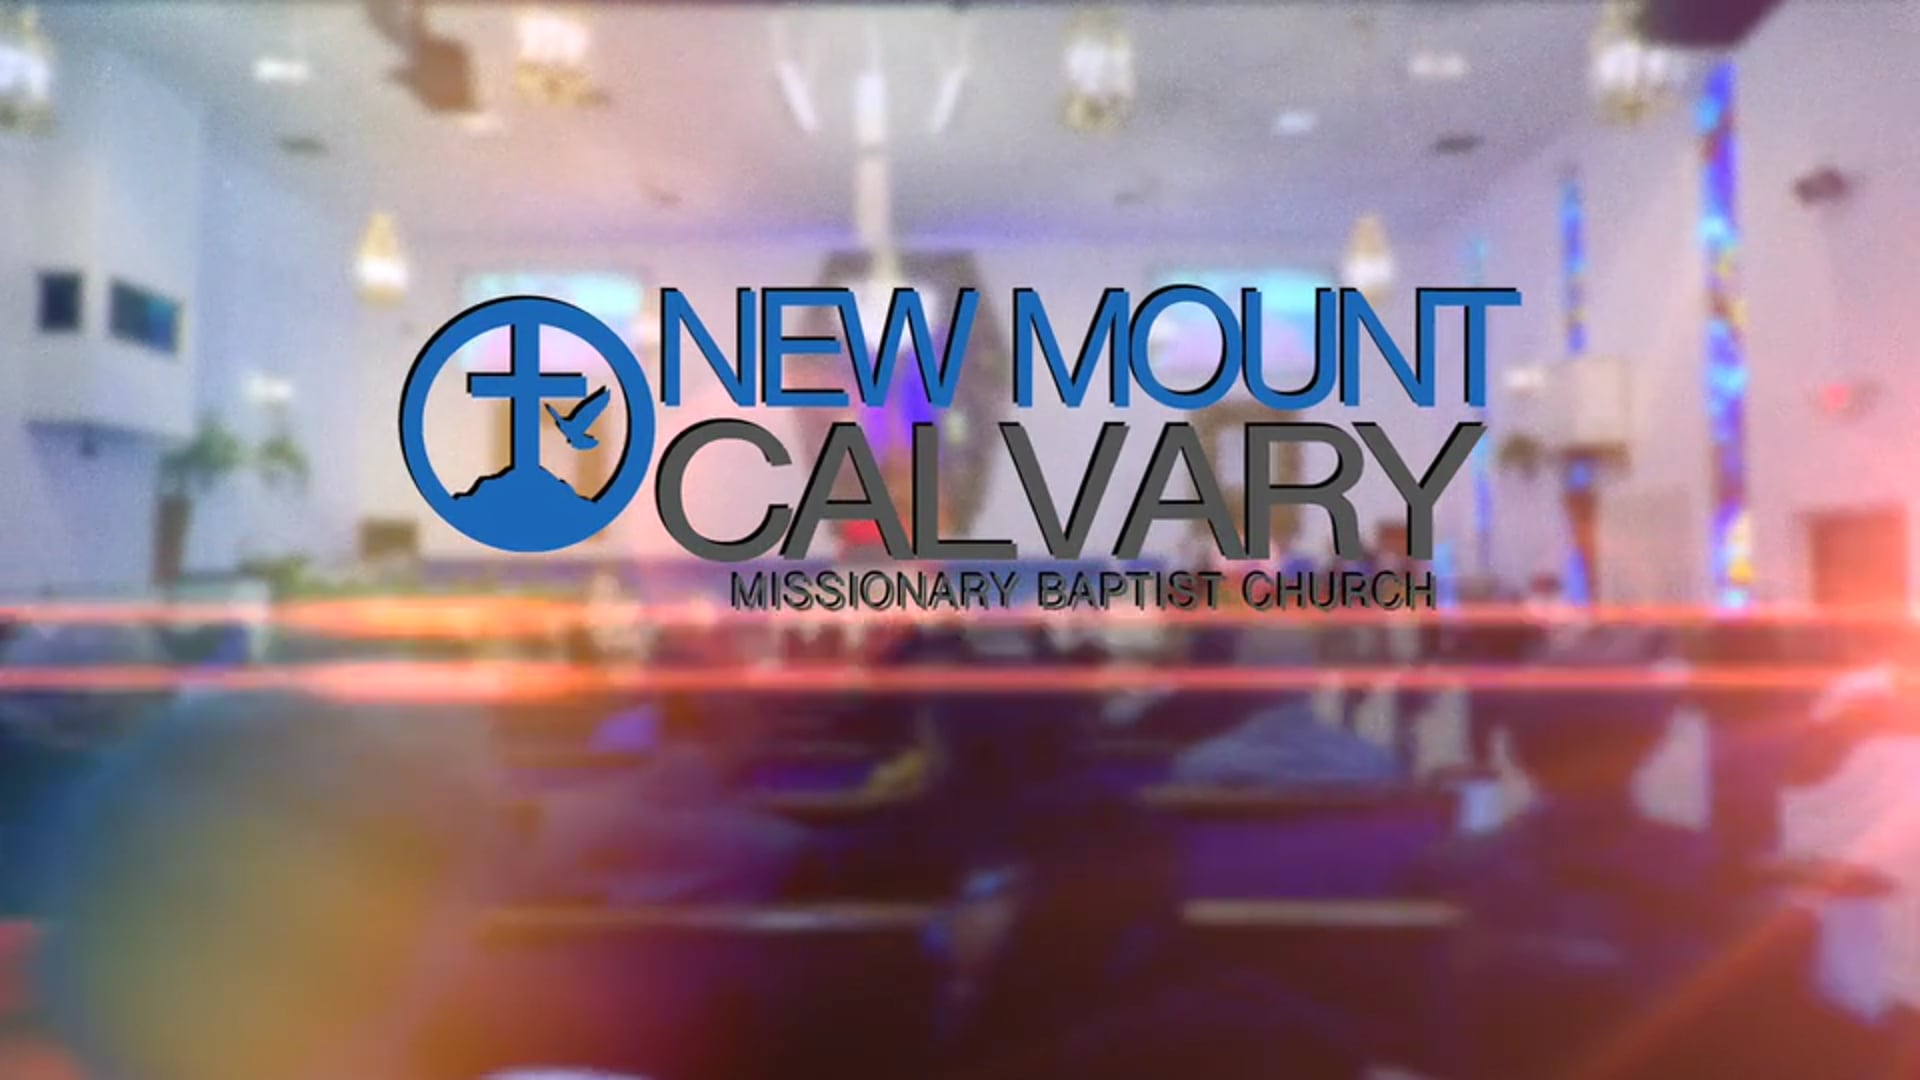 Welcome to The Mount - New Mt. Calvary MBC